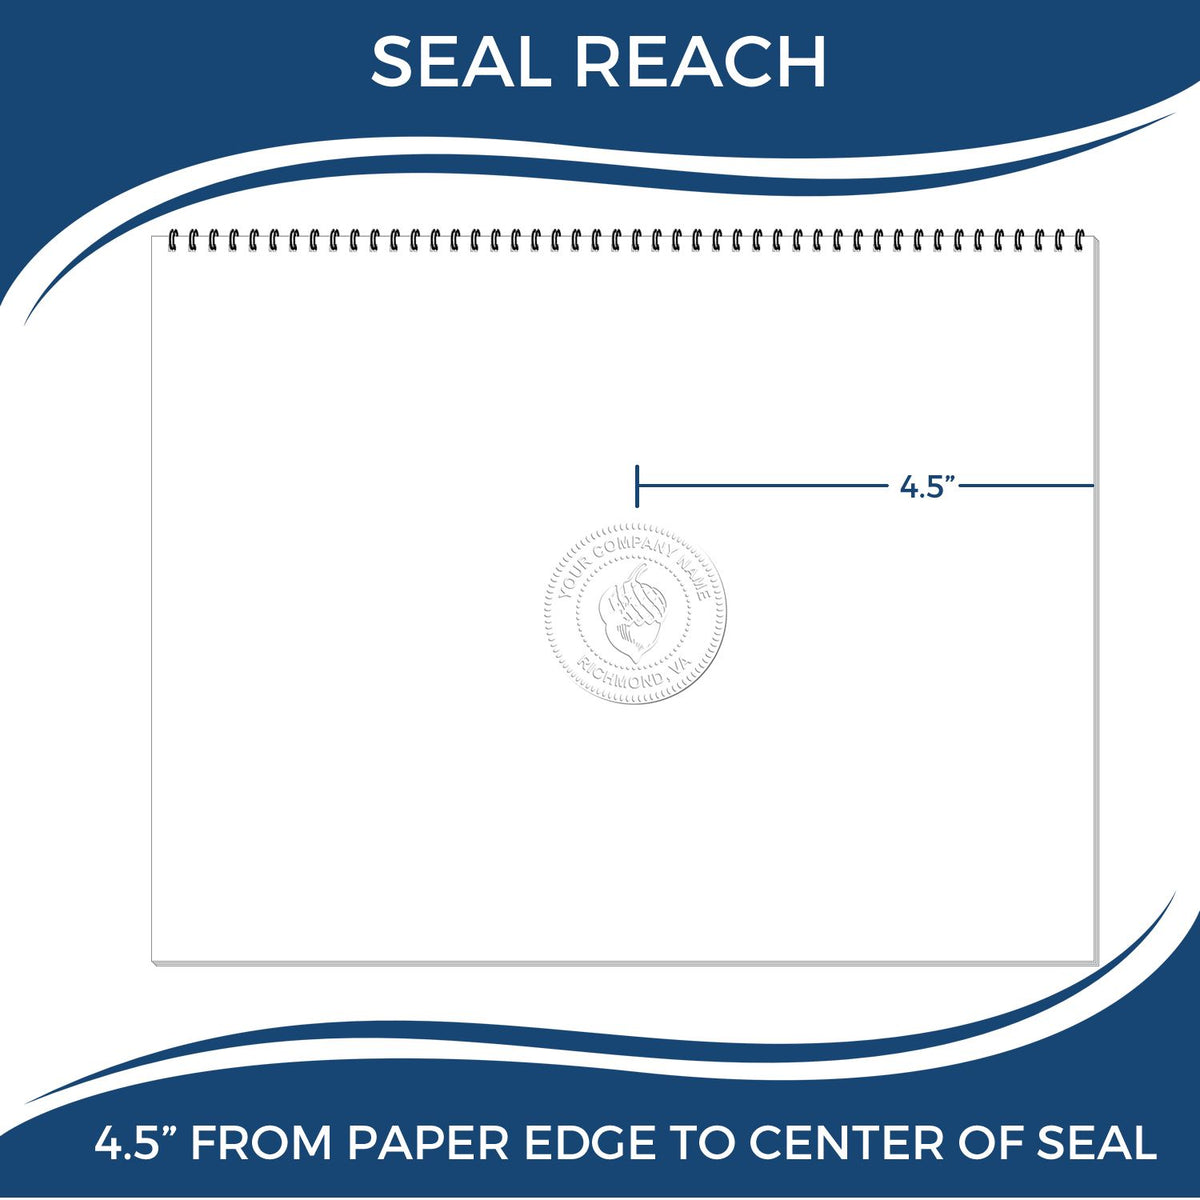 An infographic showing the seal reach which is represented by a ruler and a miniature seal image of the Extended Long Reach South Dakota Architect Seal Embosser